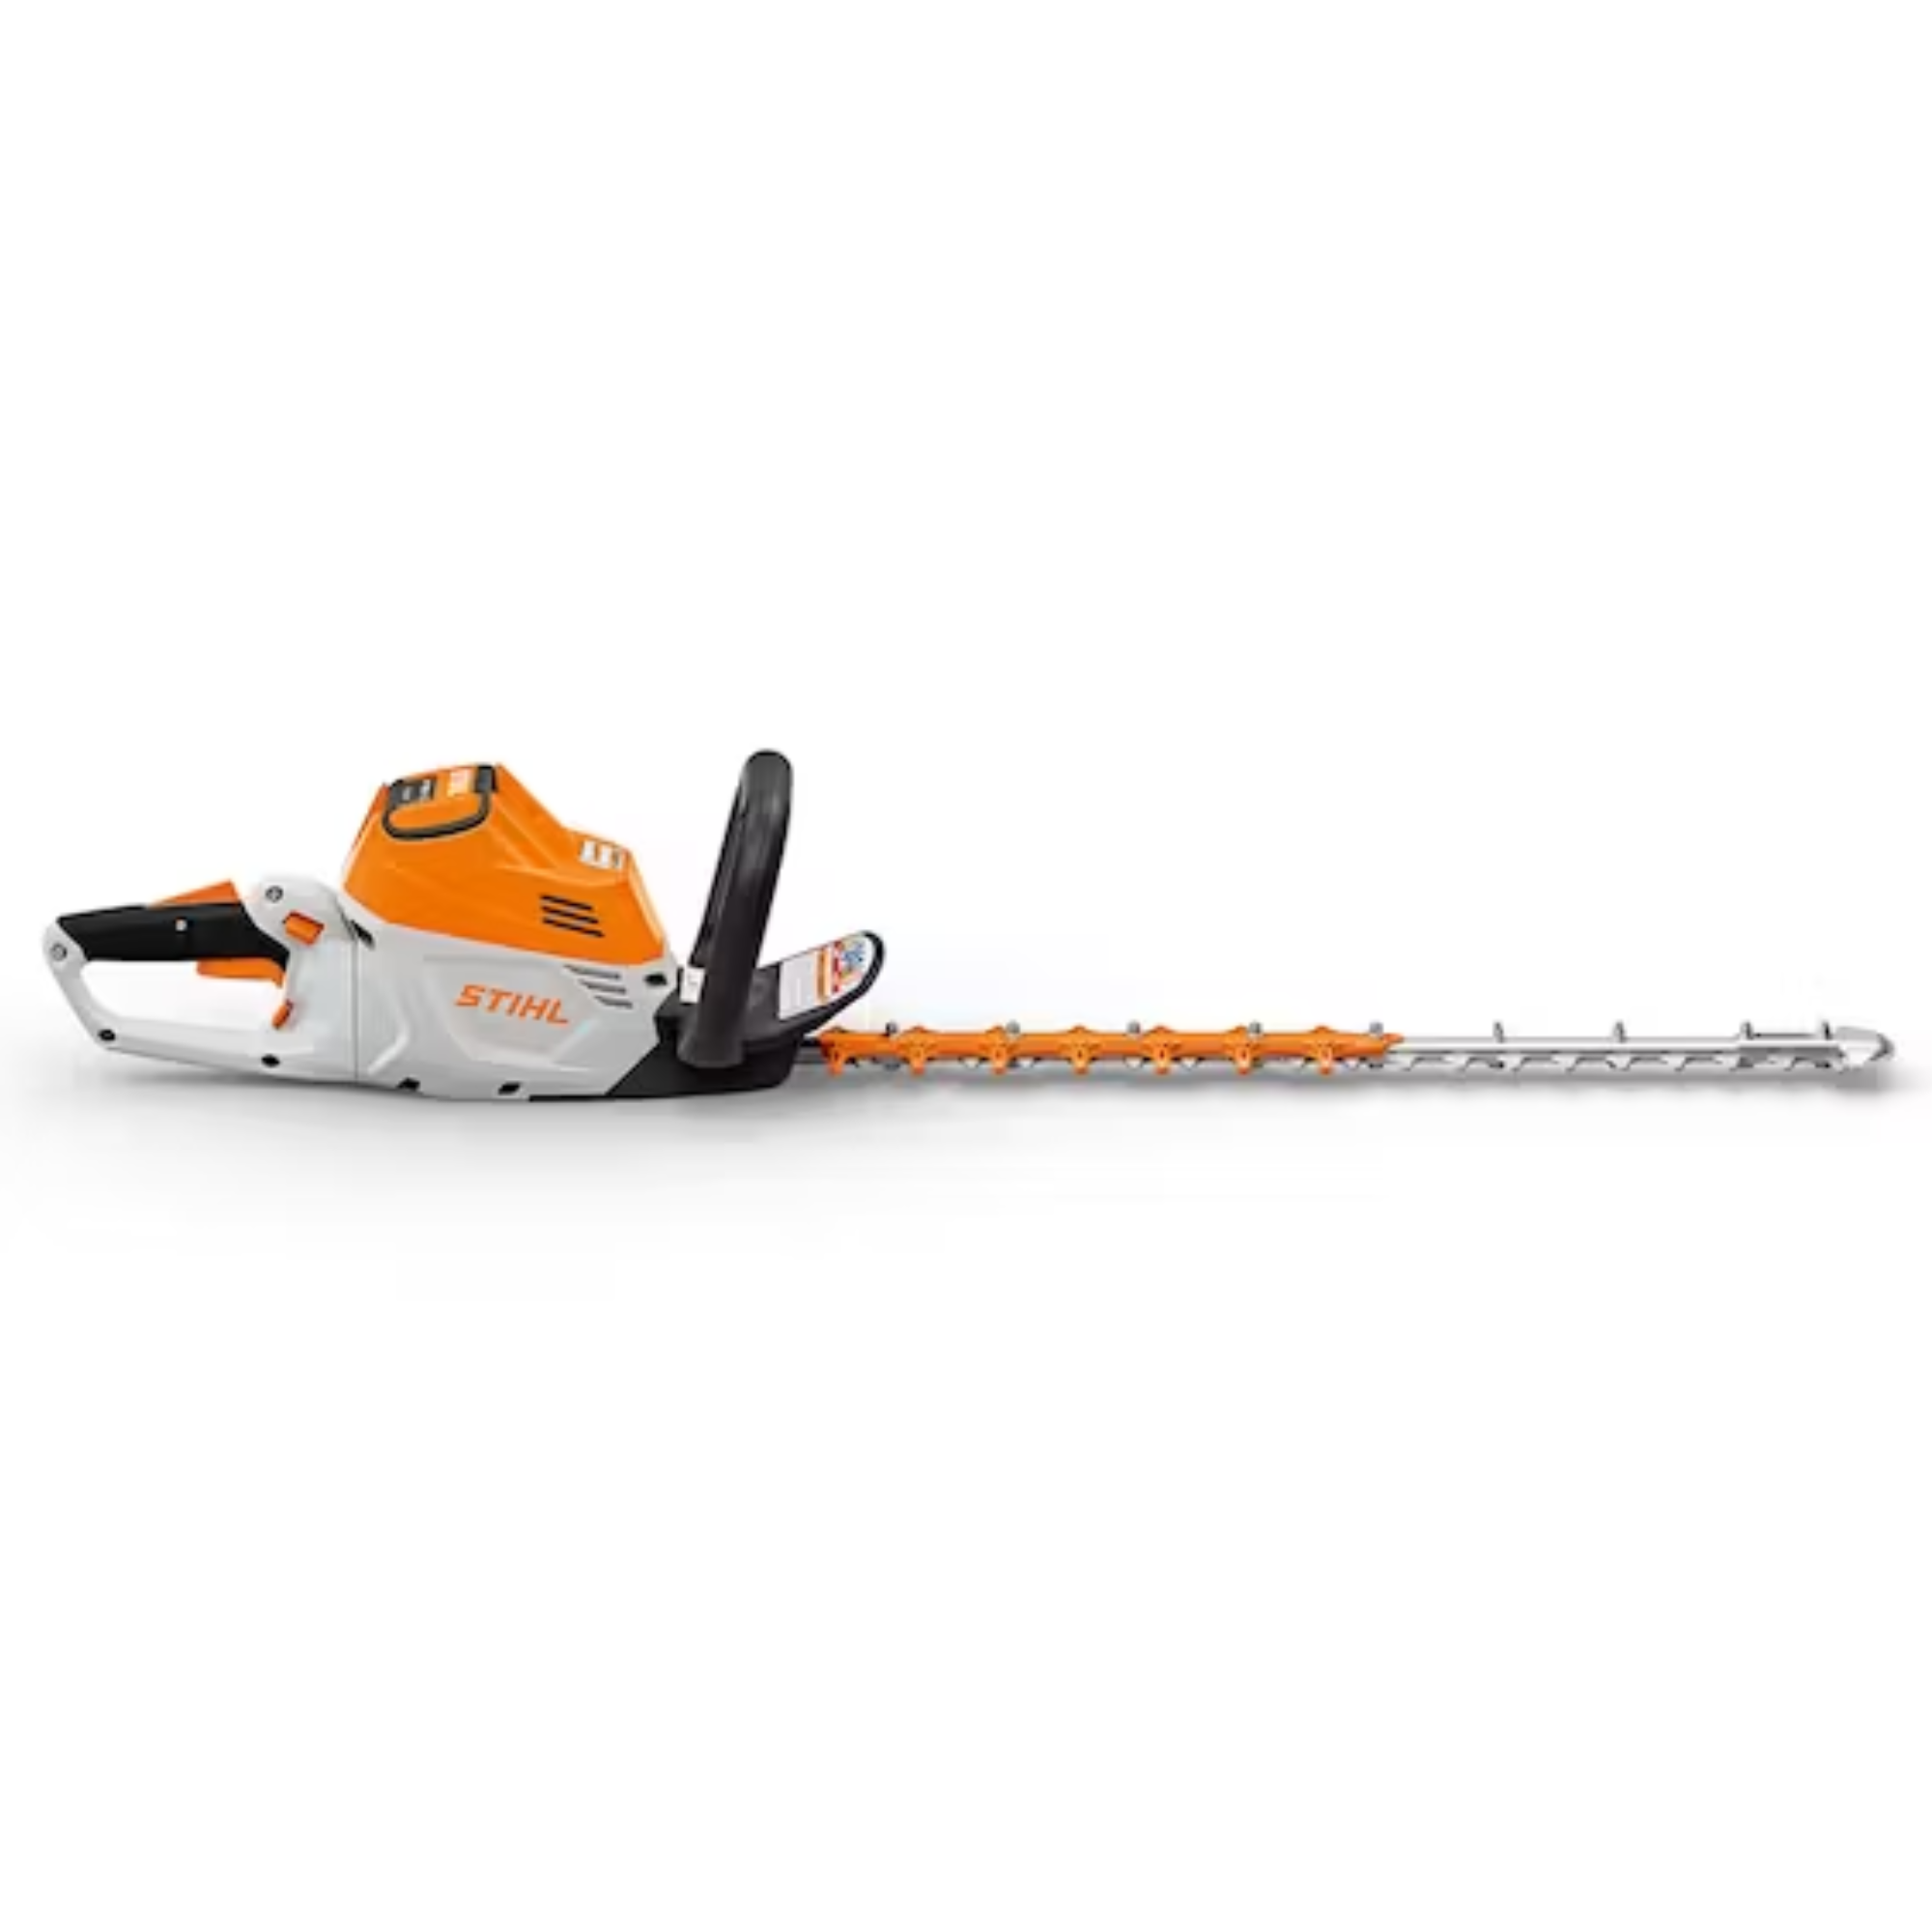 Stihl Commercial Grade Battery Powered HSA 100 Hedge Trimmer - Tool Only